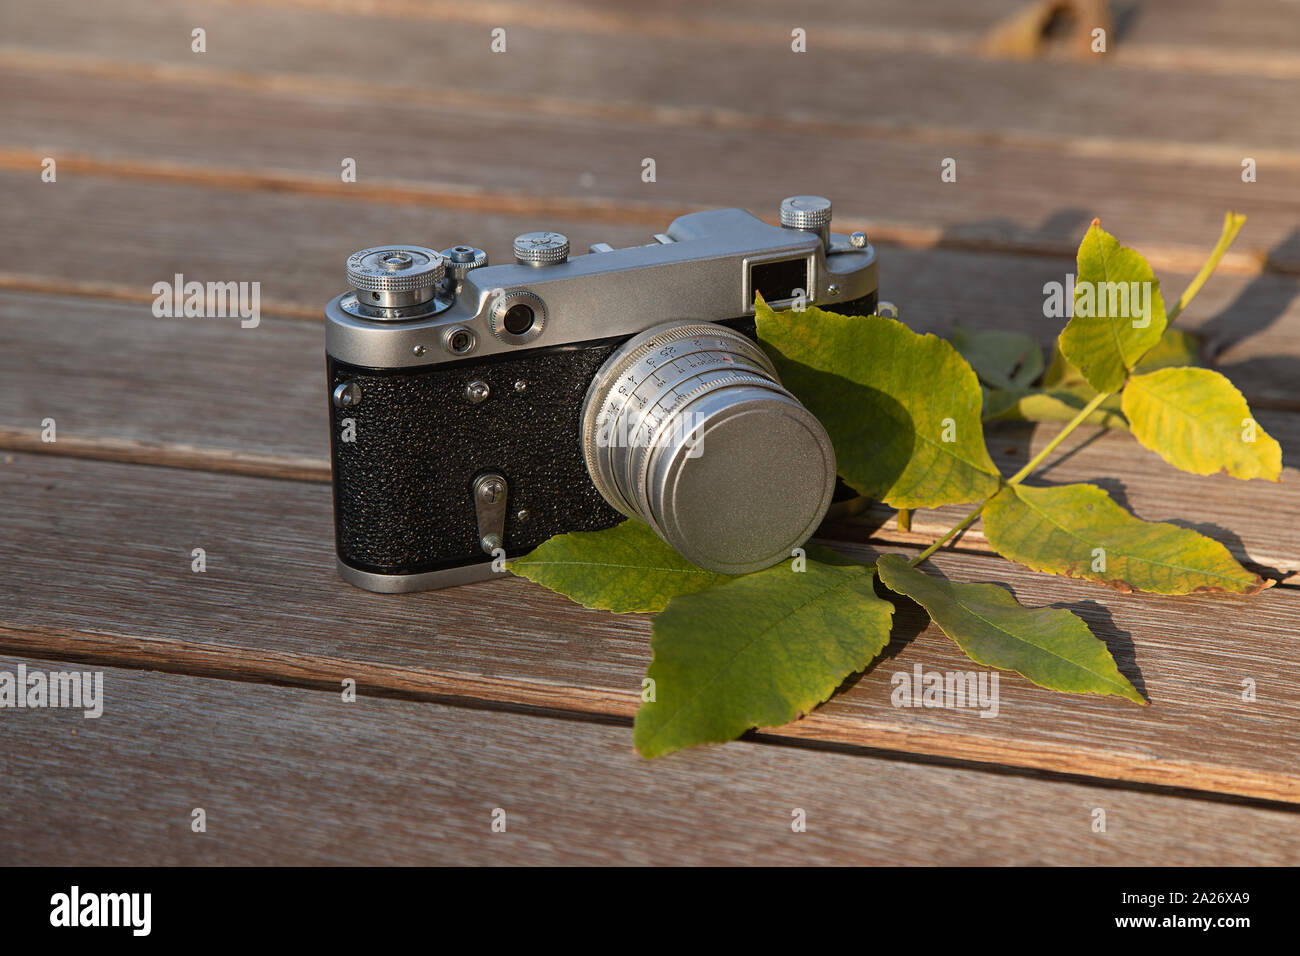 Still life autumn mood picture with vintage rangefinder camera and leaves on wooden background Stock Photo